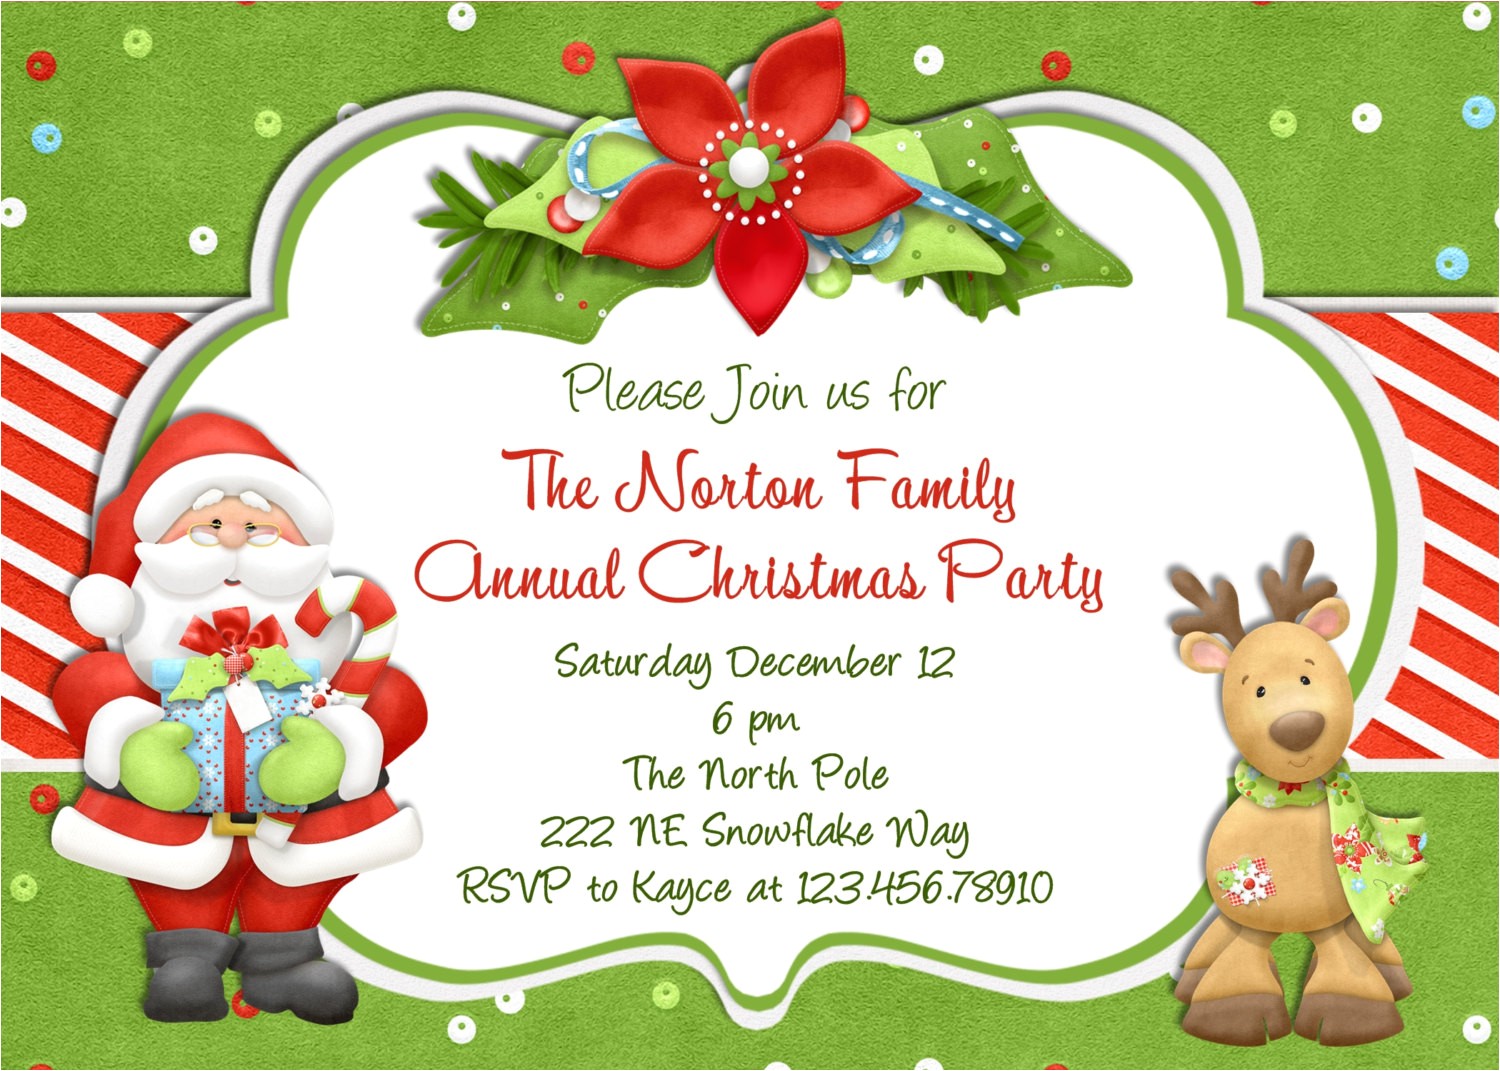 cheap christmas party invitations with red color background ideas religious event and party invitation card design ideas appealing